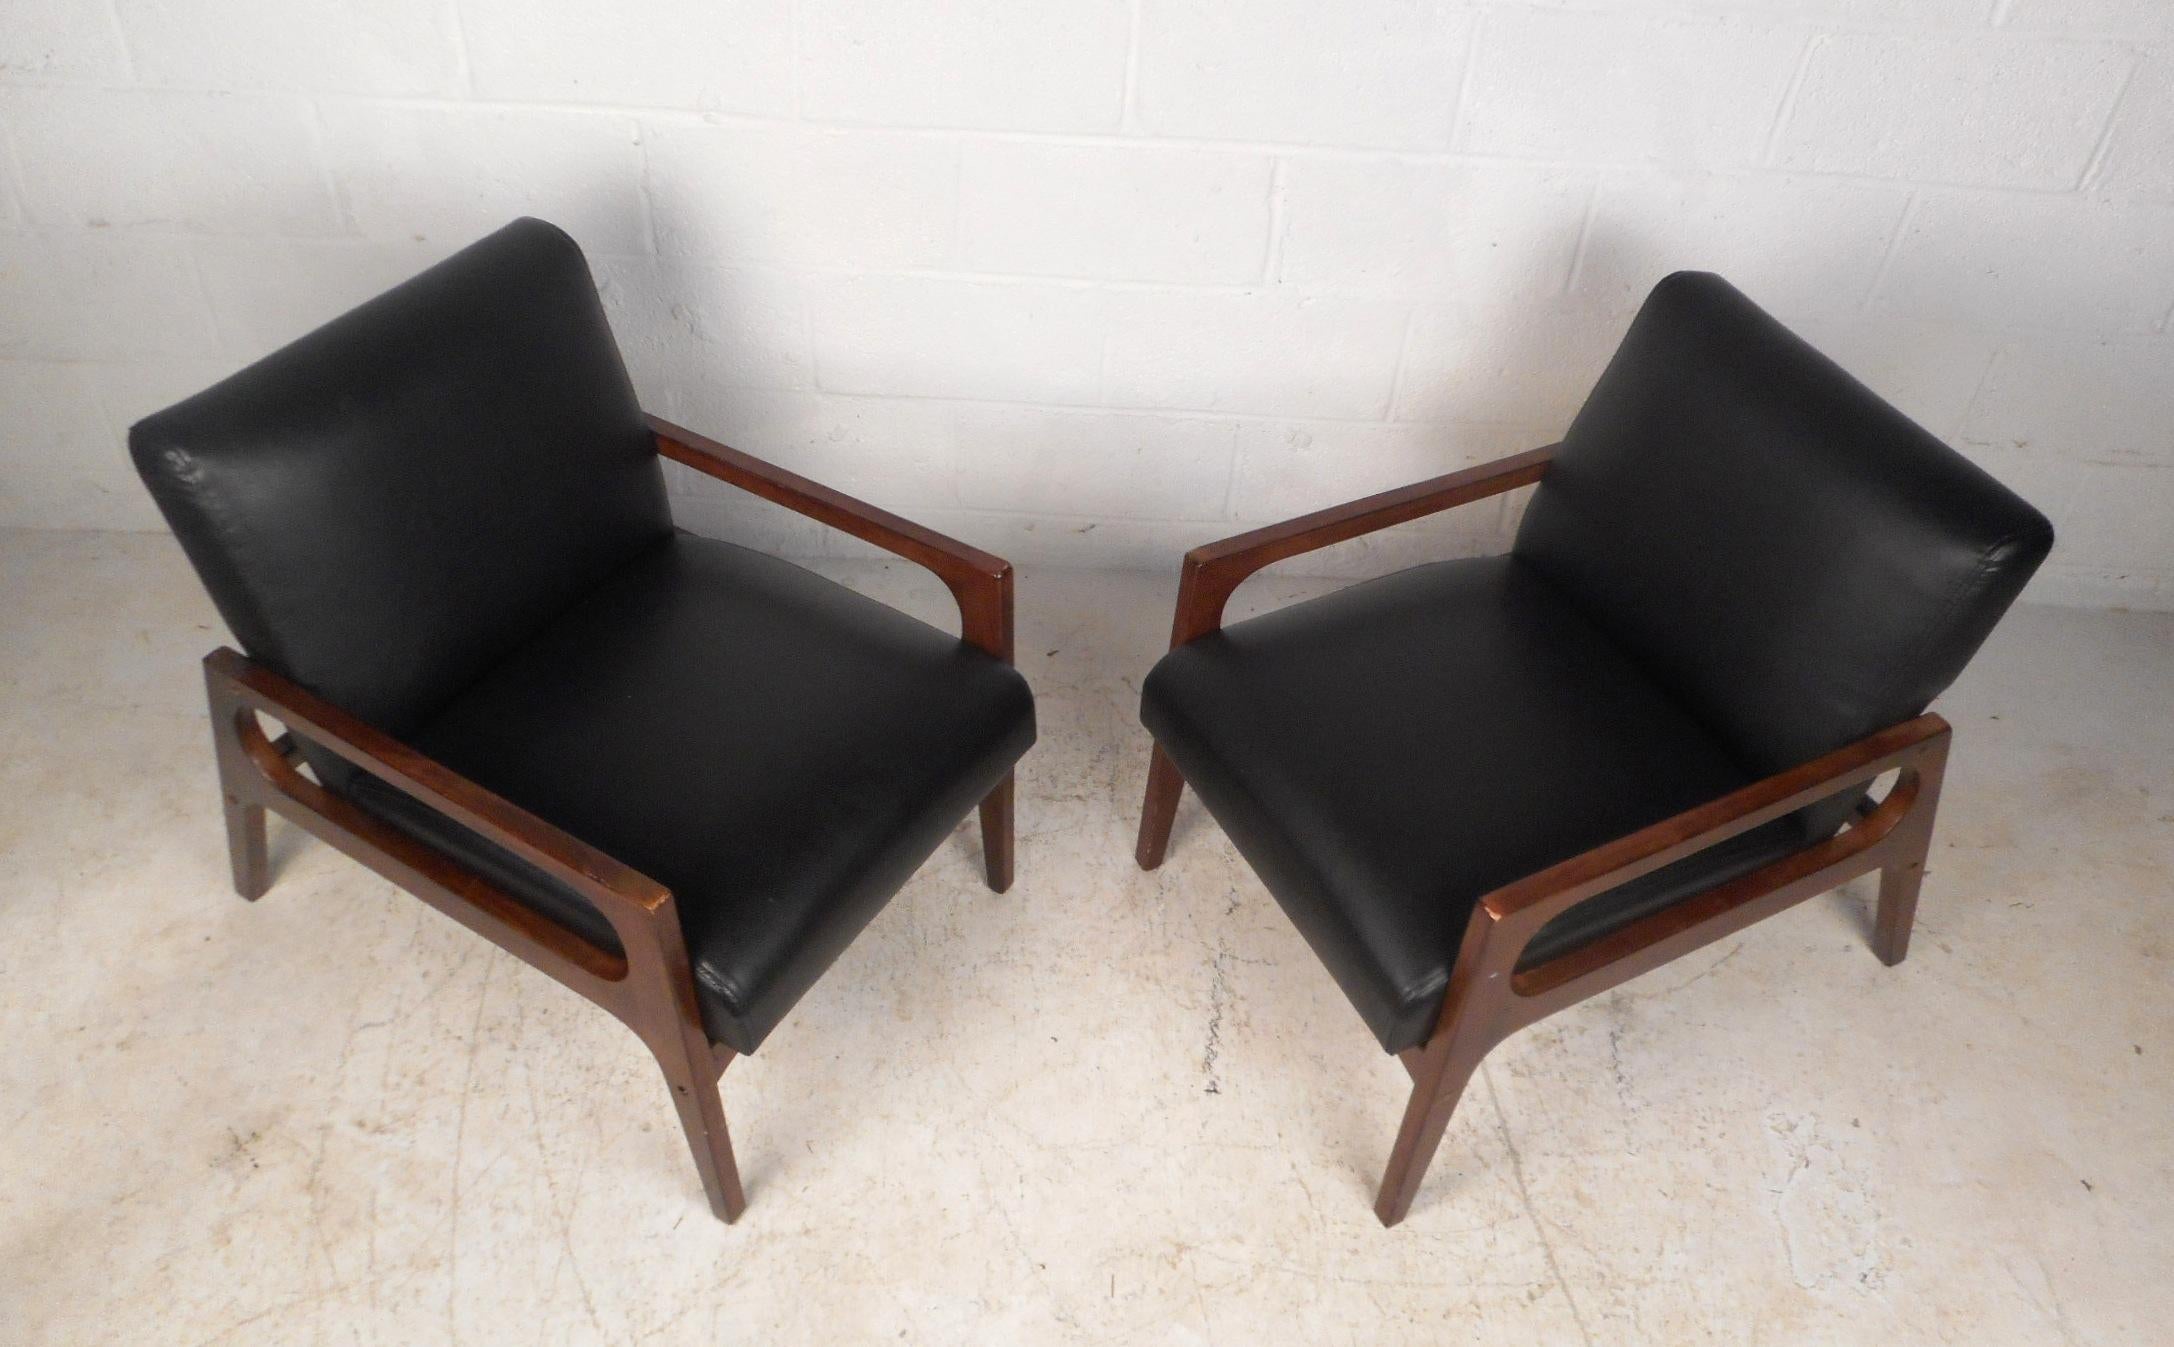 This stunning pair of vintage modern lounge chairs feature a sculpted walnut frame with low armrests and angled back legs. An extremely comfortable design with thick padded seating covered in black vinyl. This sleek and sturdy pair of midcentury